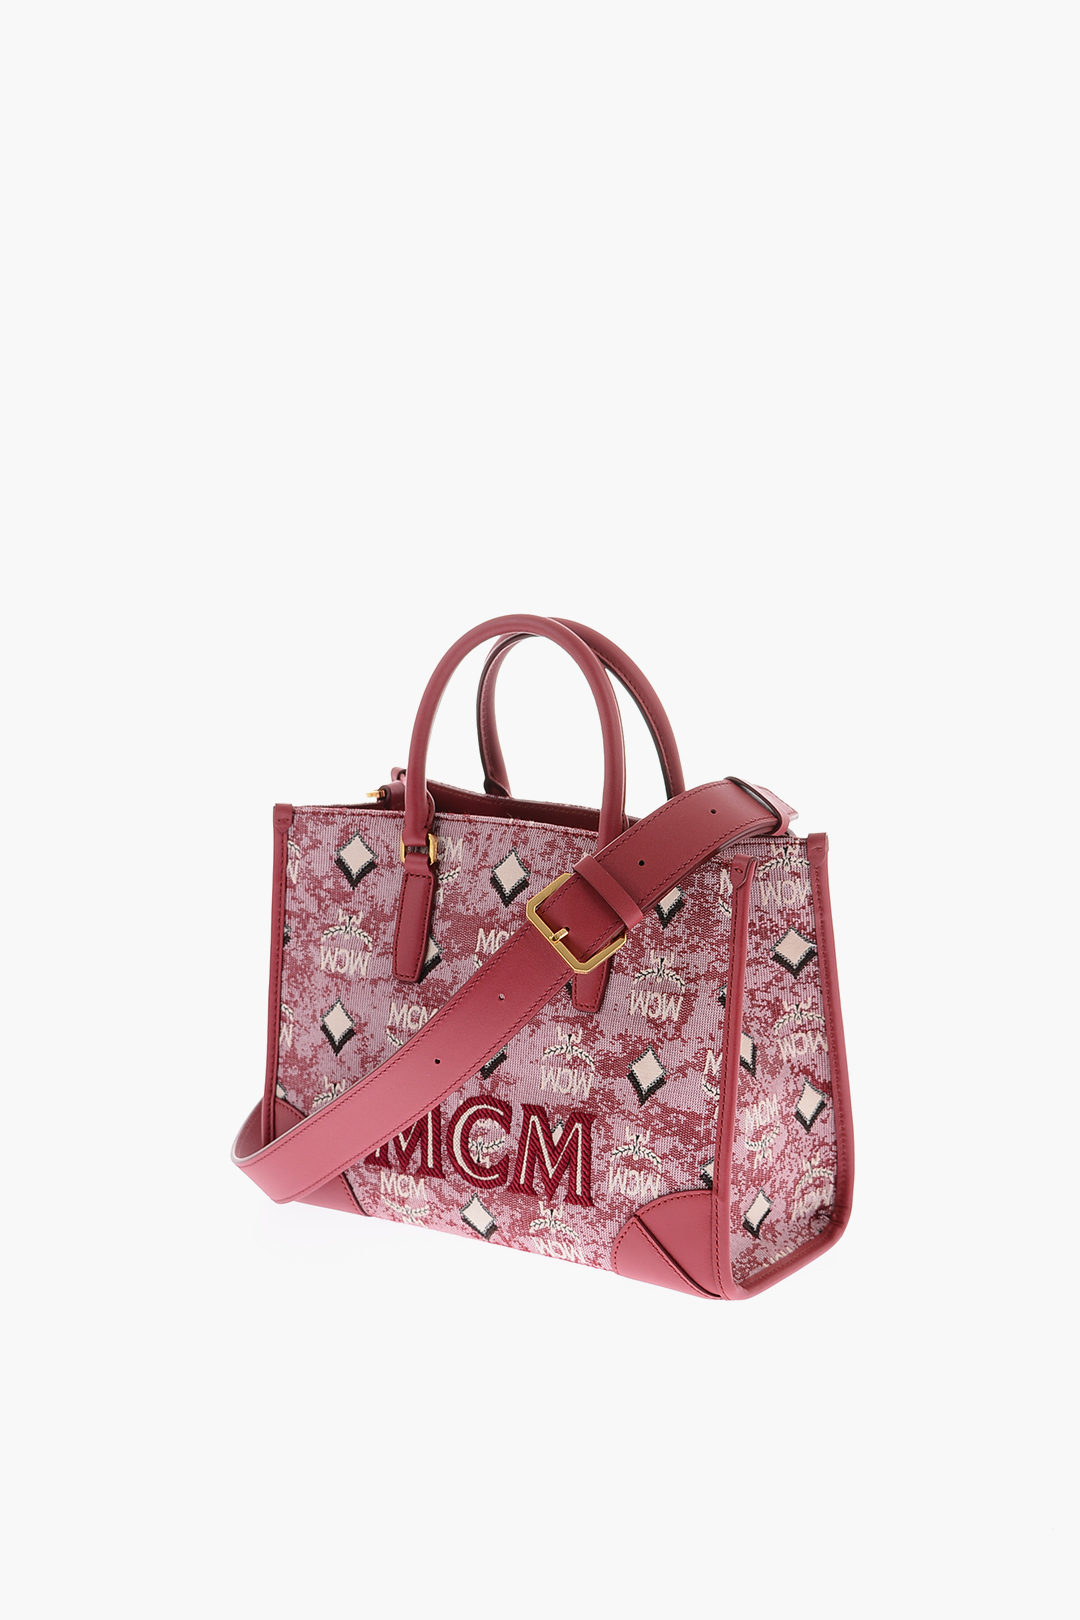 OUTLET 30% Discount Free Shipping Worldwide Mcm Munchen 